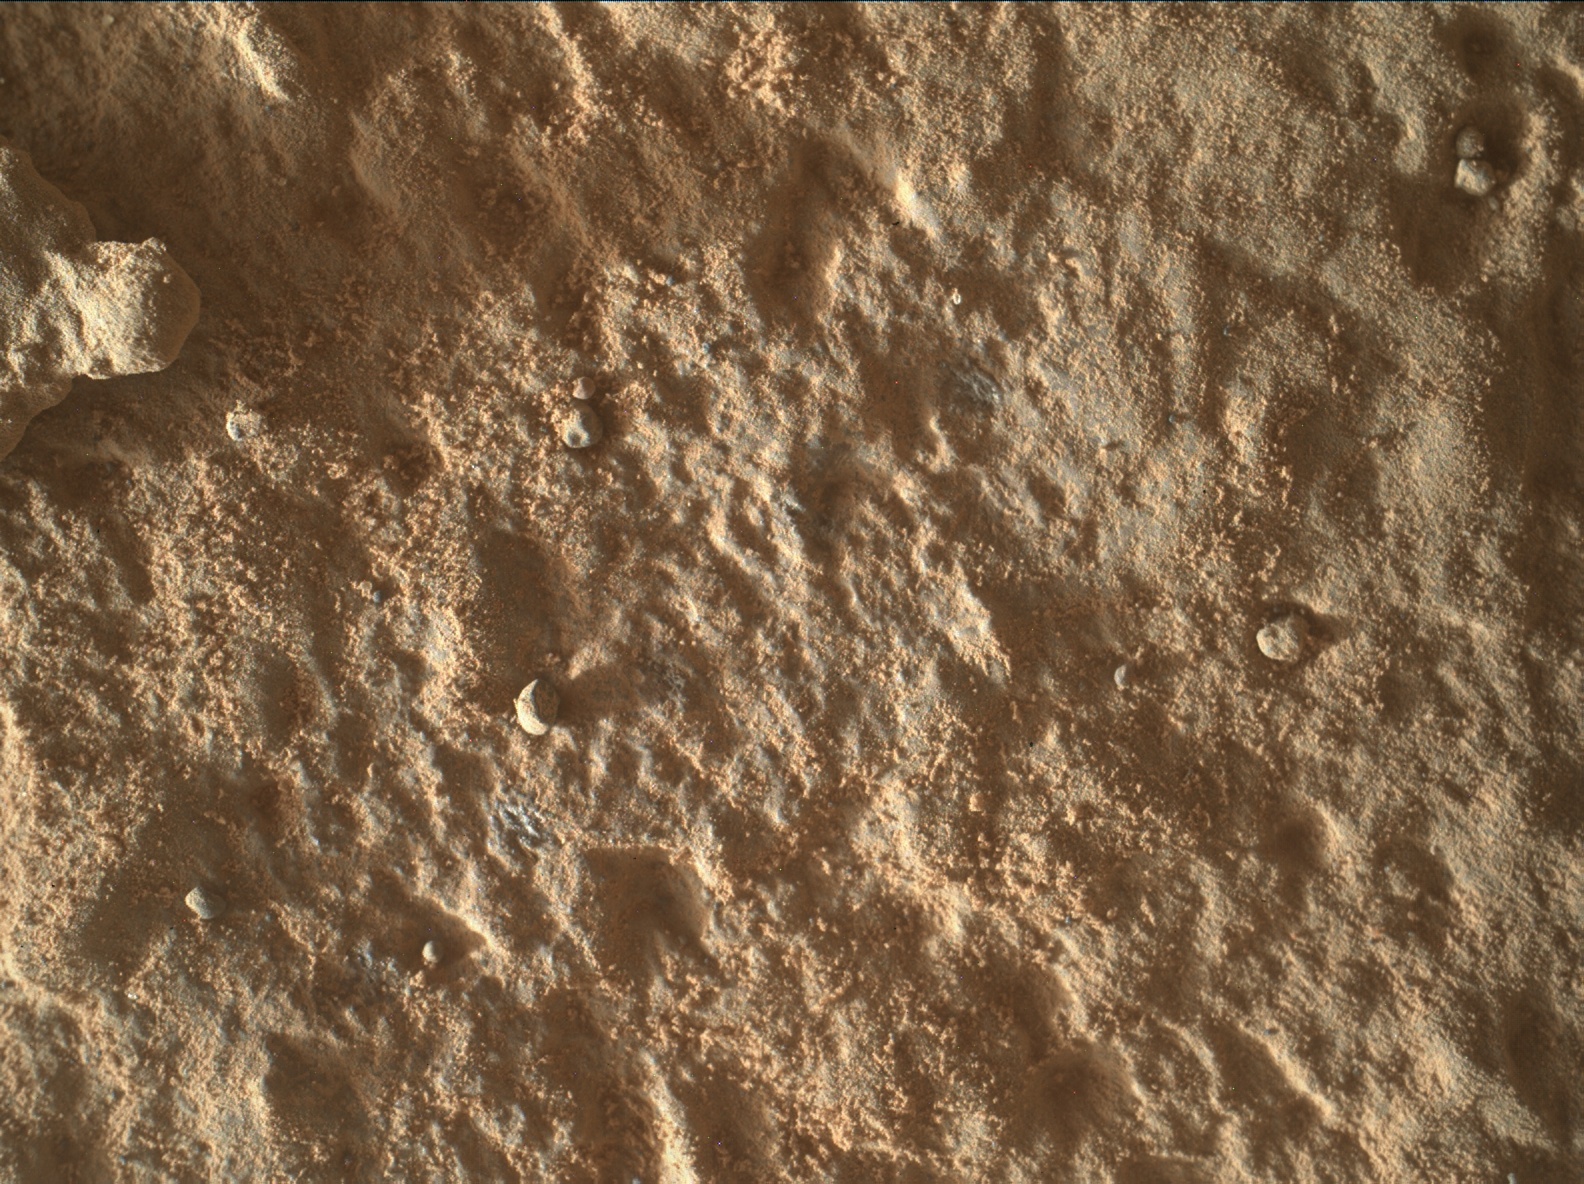 Nasa's Mars rover Curiosity acquired this image using its Mars Hand Lens Imager (MAHLI) on Sol 3971